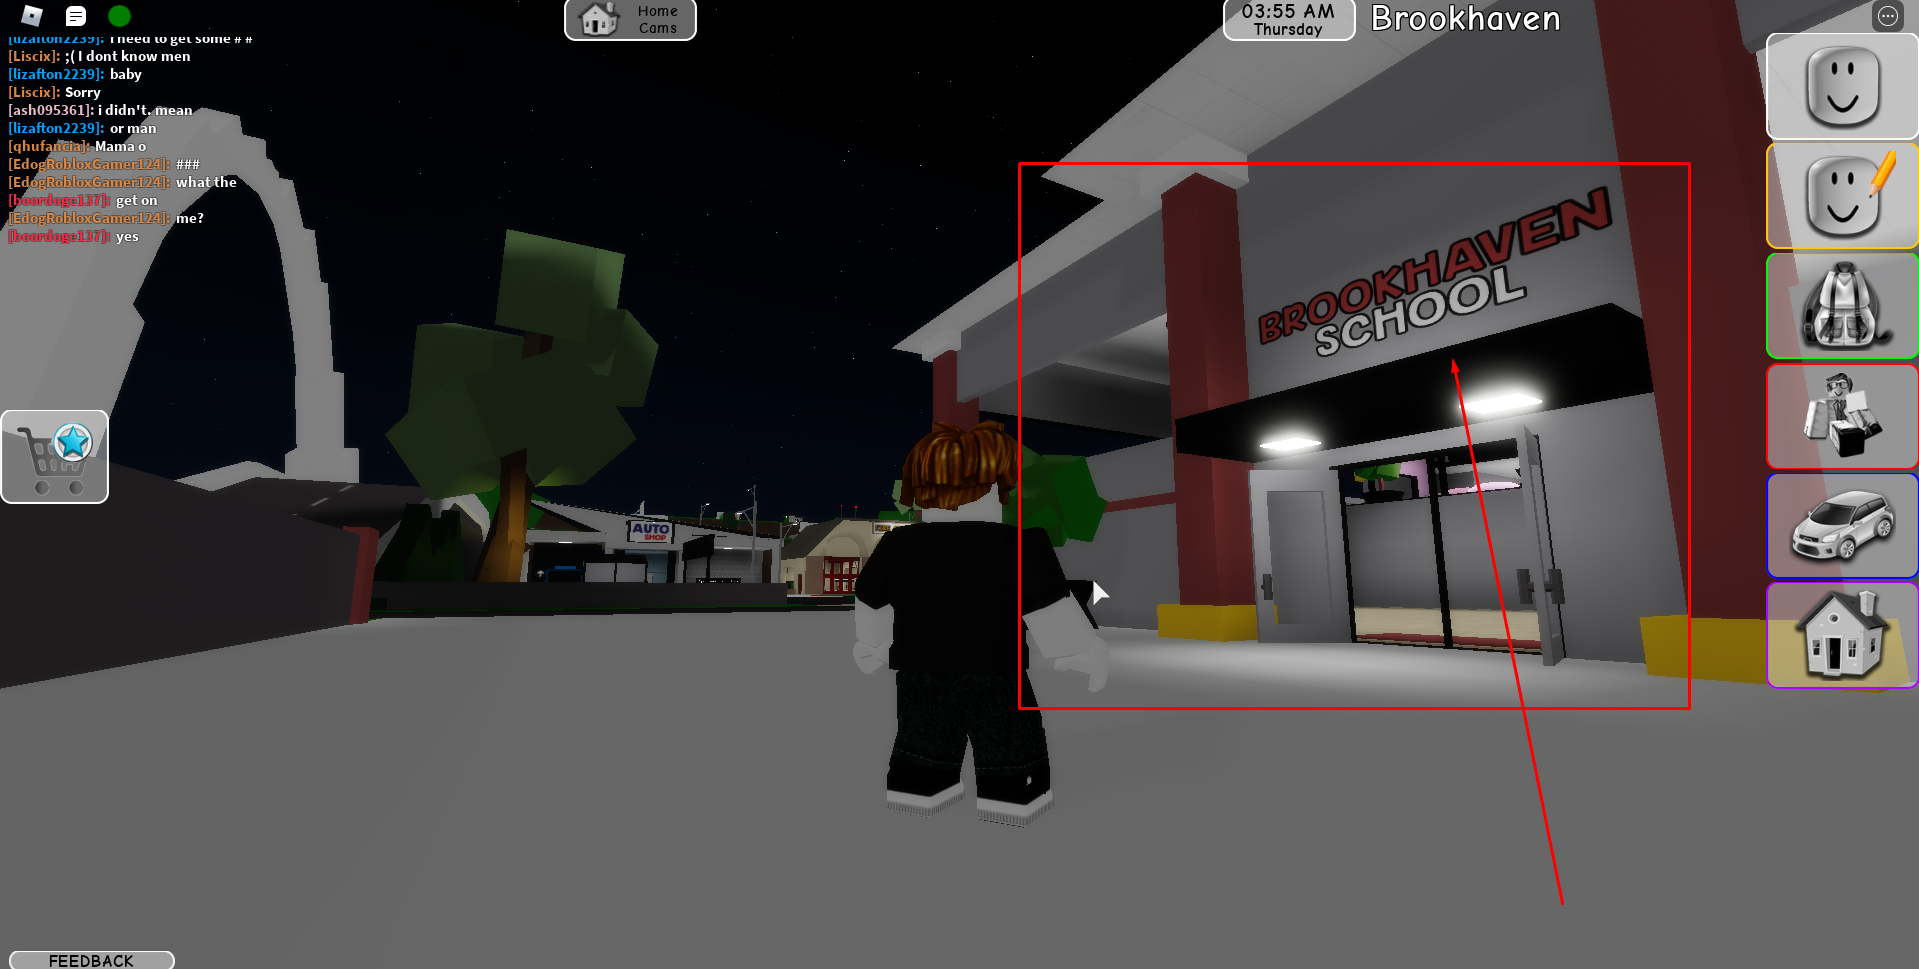 Where To Find School Location In Roblox Brookhaven Rp Steam Lists - brookhaven roblox map 2021